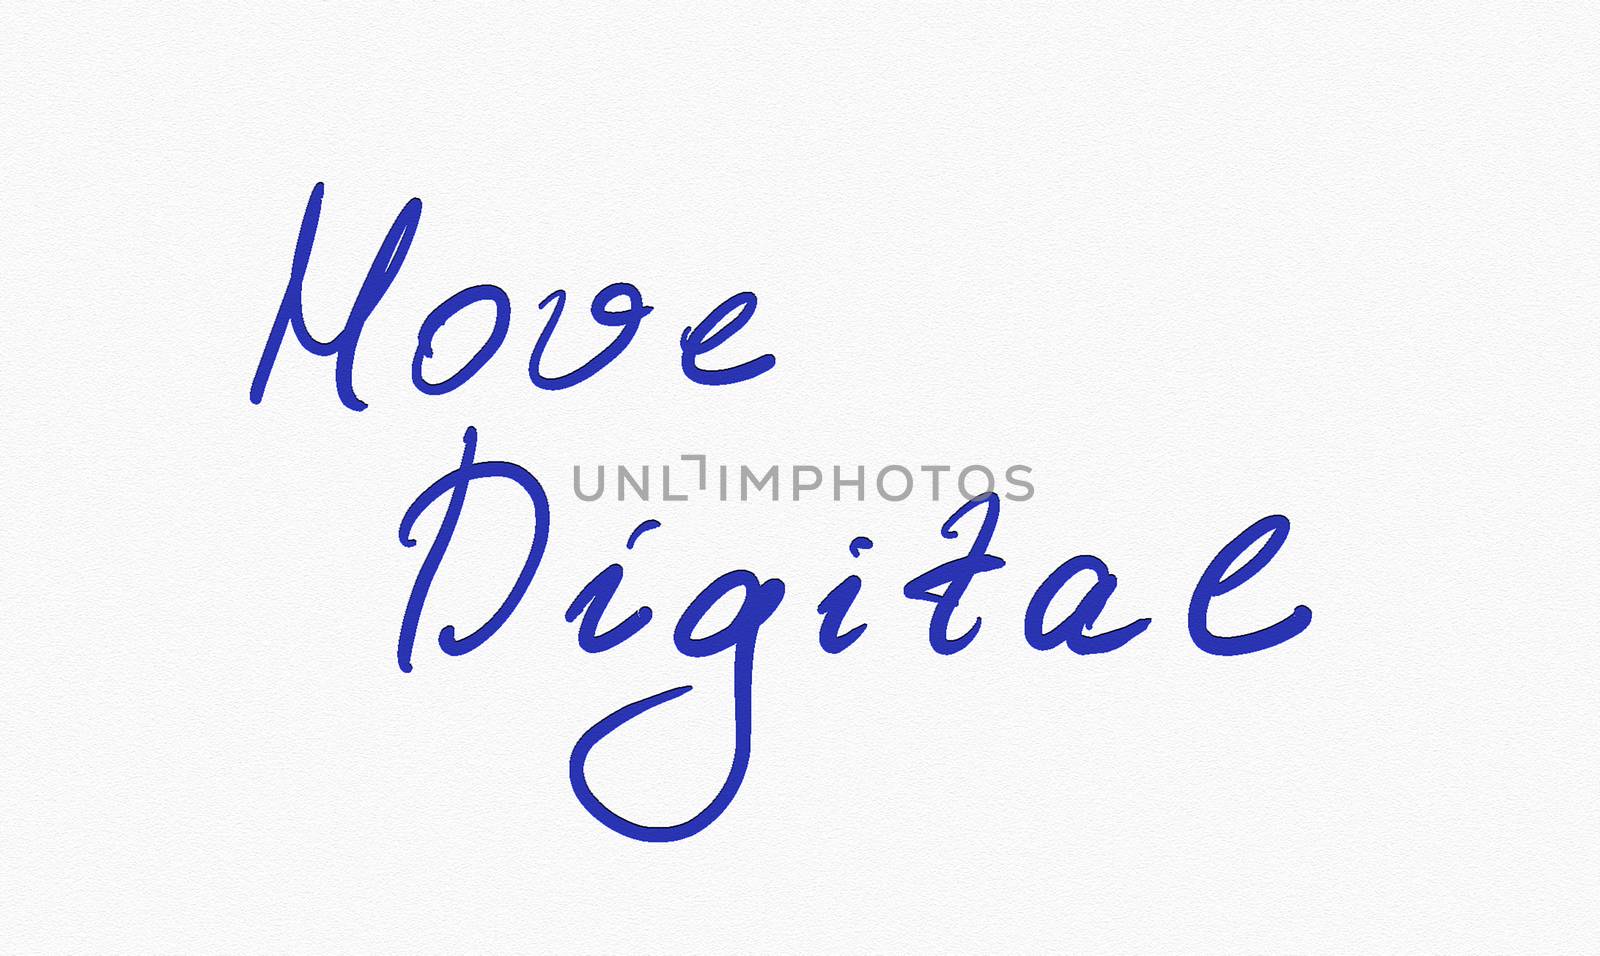 Move Digital Hand written note. Illustration isolated on white by F1b0nacci